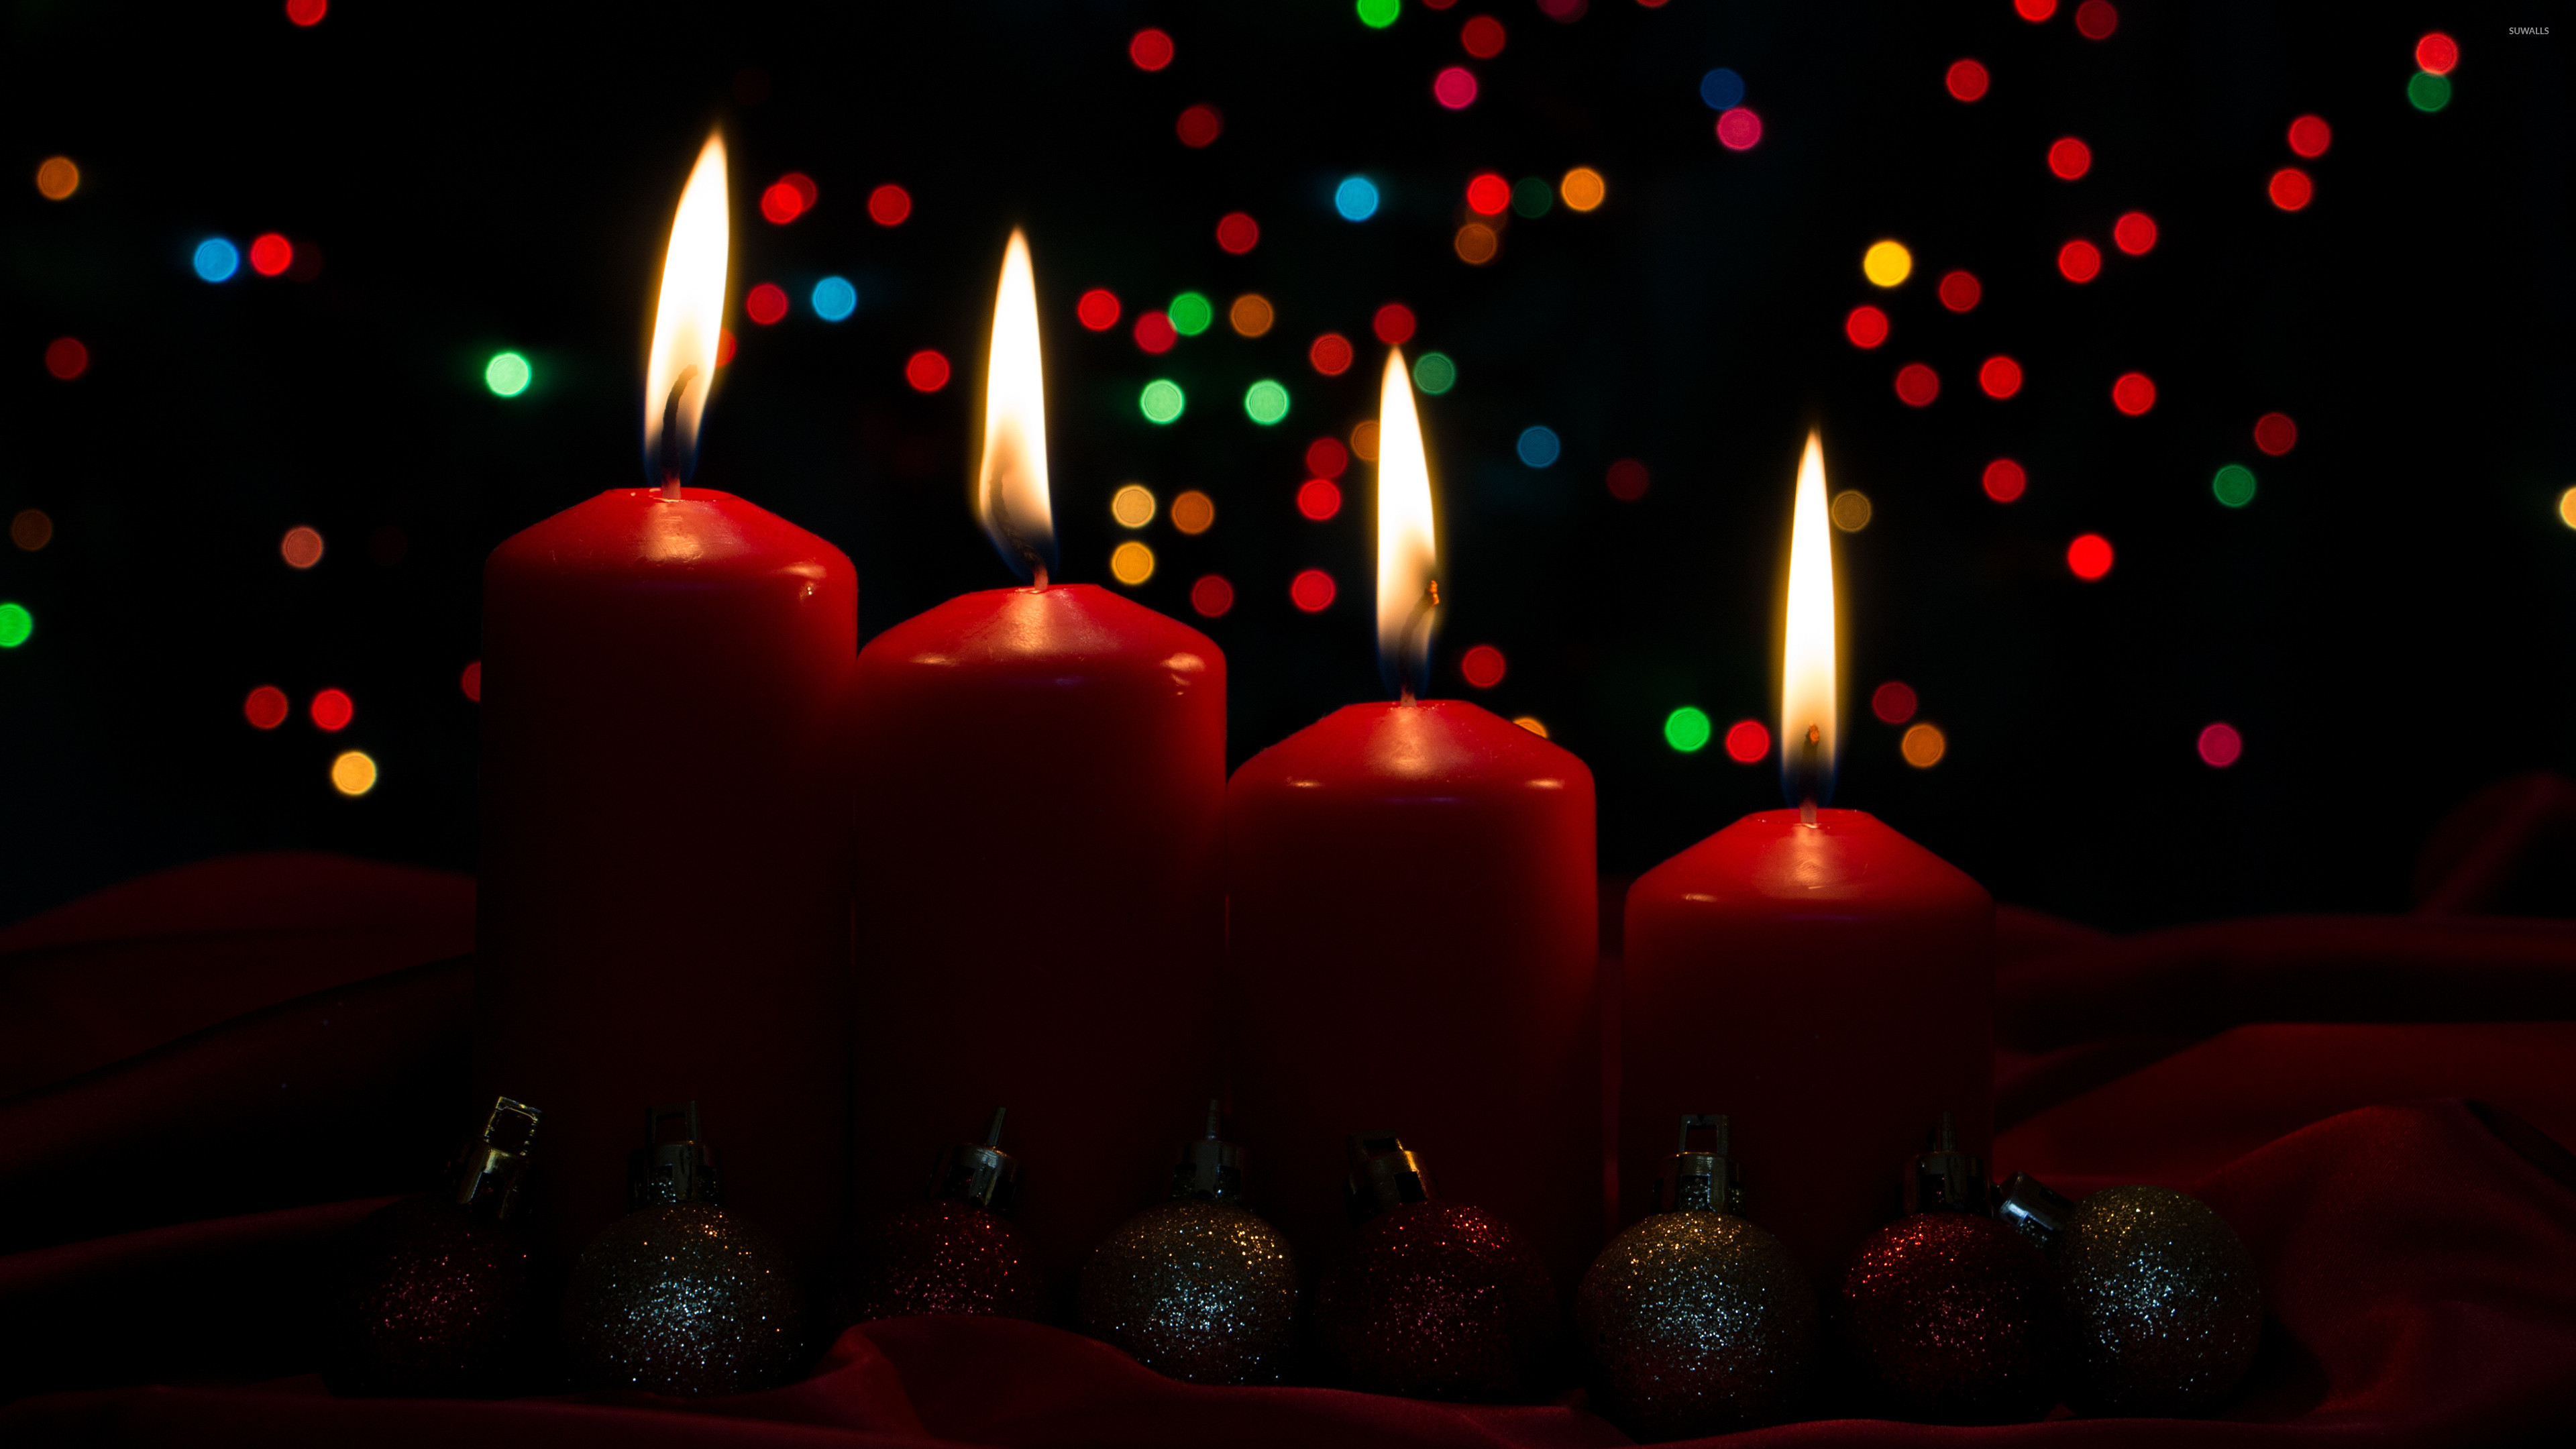 Red Advent candles wallpaper